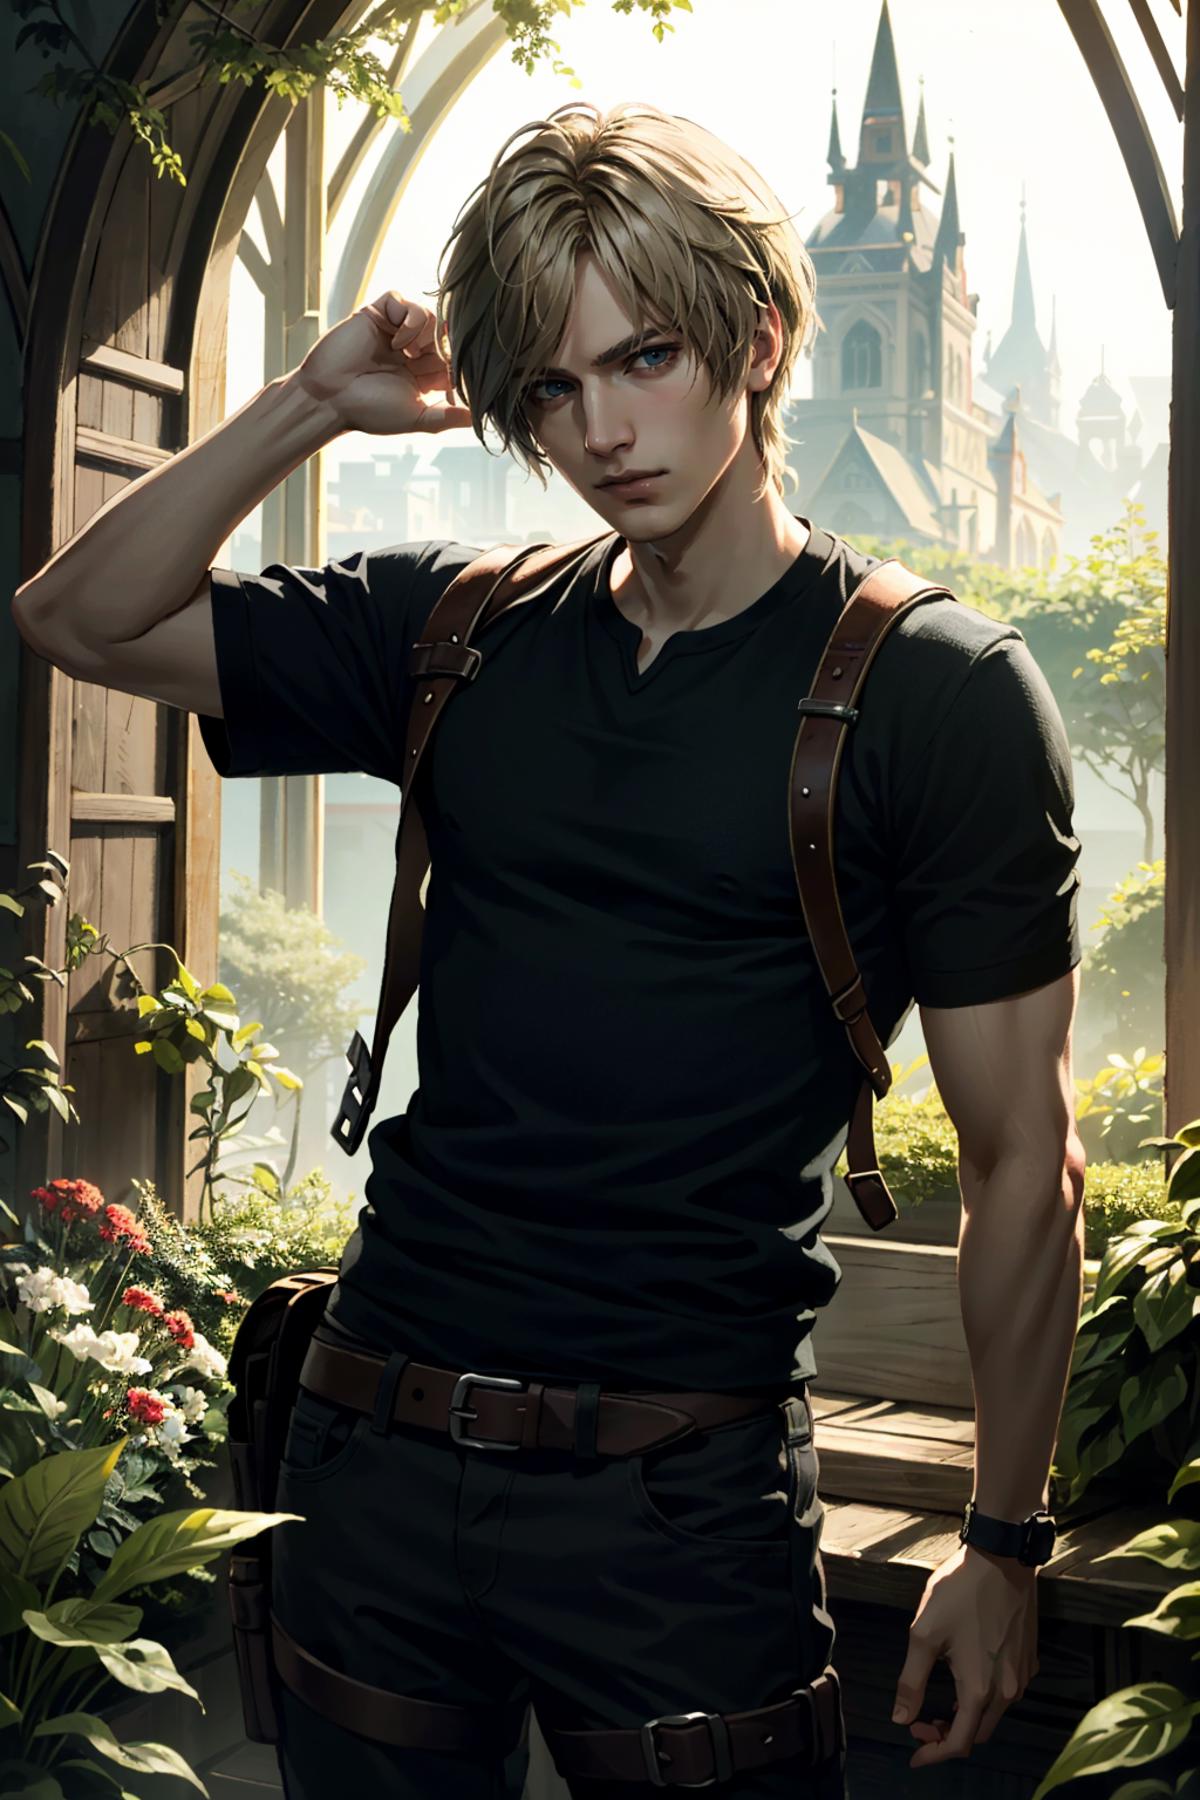 Leon from Resident Evil 4 image by BloodRedKittie